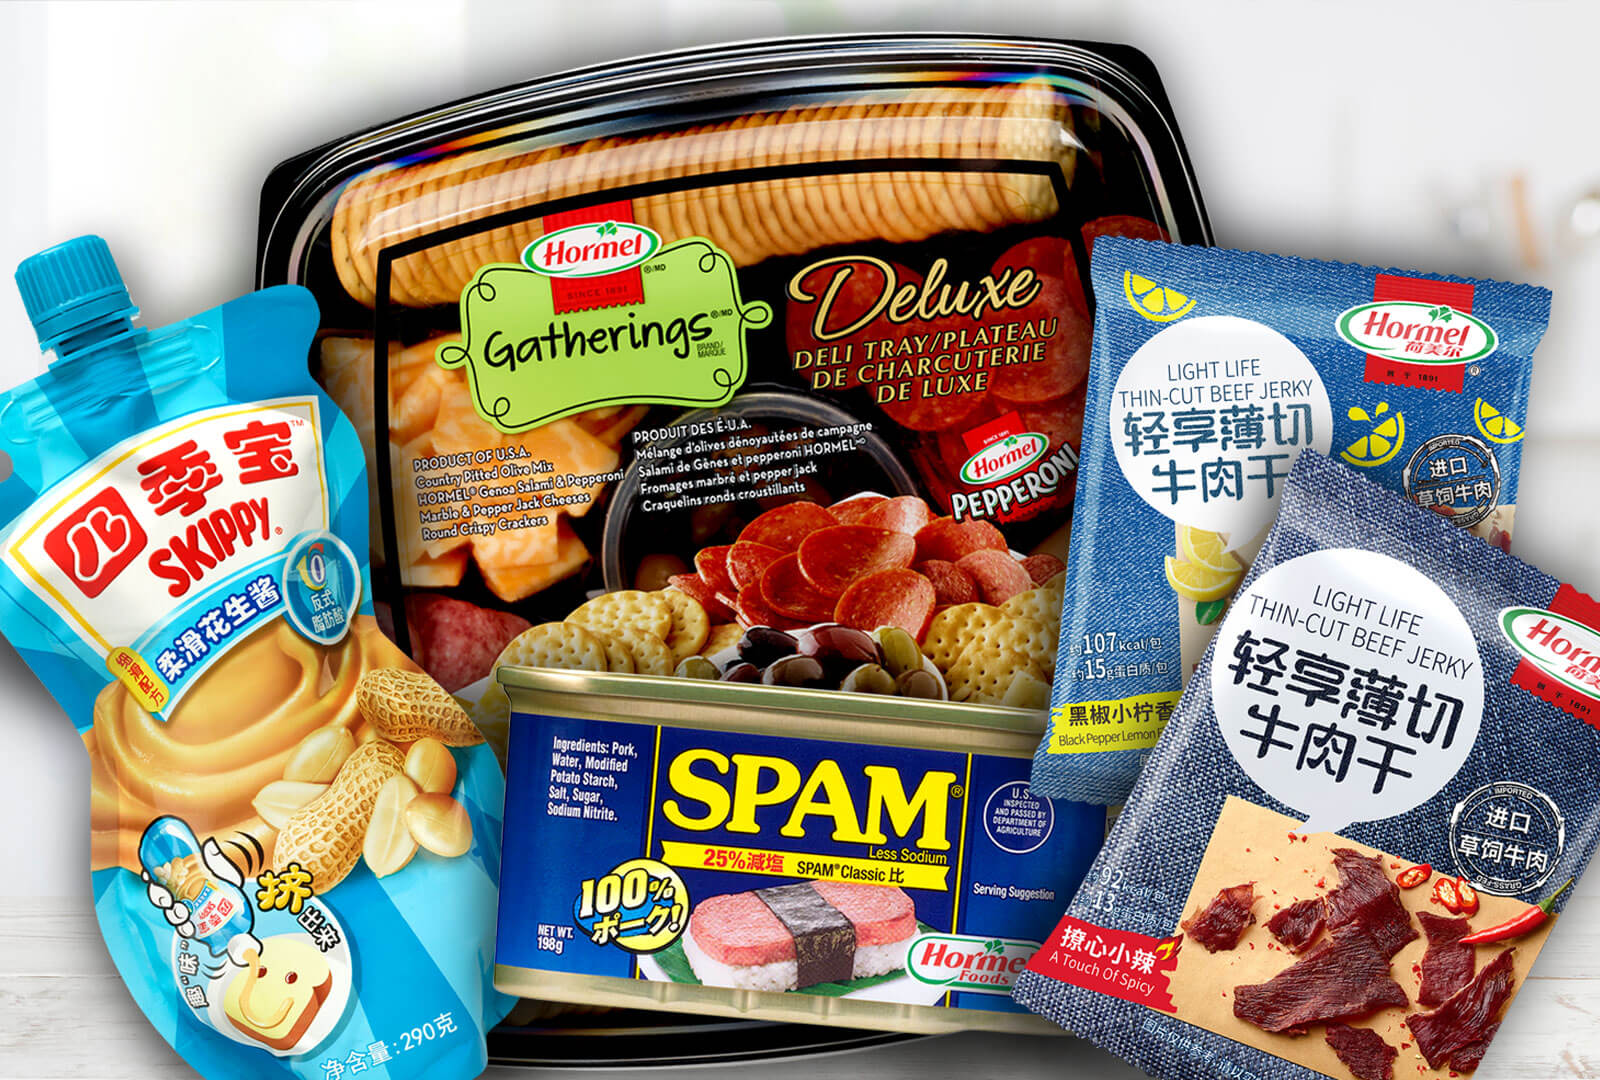 A number of Hormel products from Asia grouped together in a kitchen